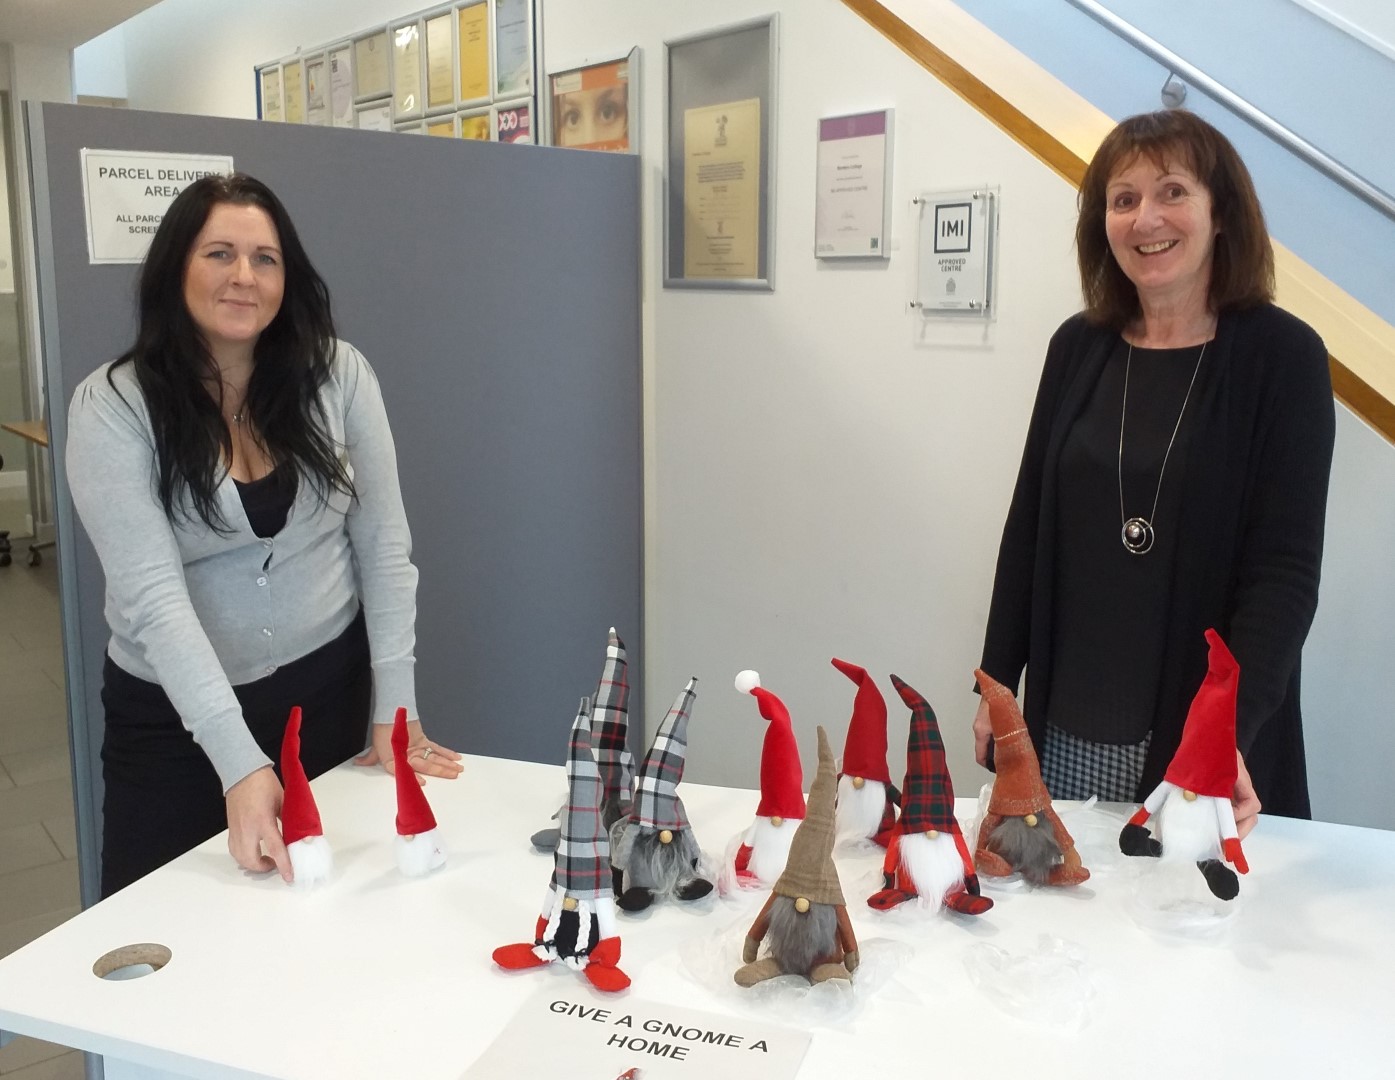 Sheila McColm and Dawn Routledge with gnomes